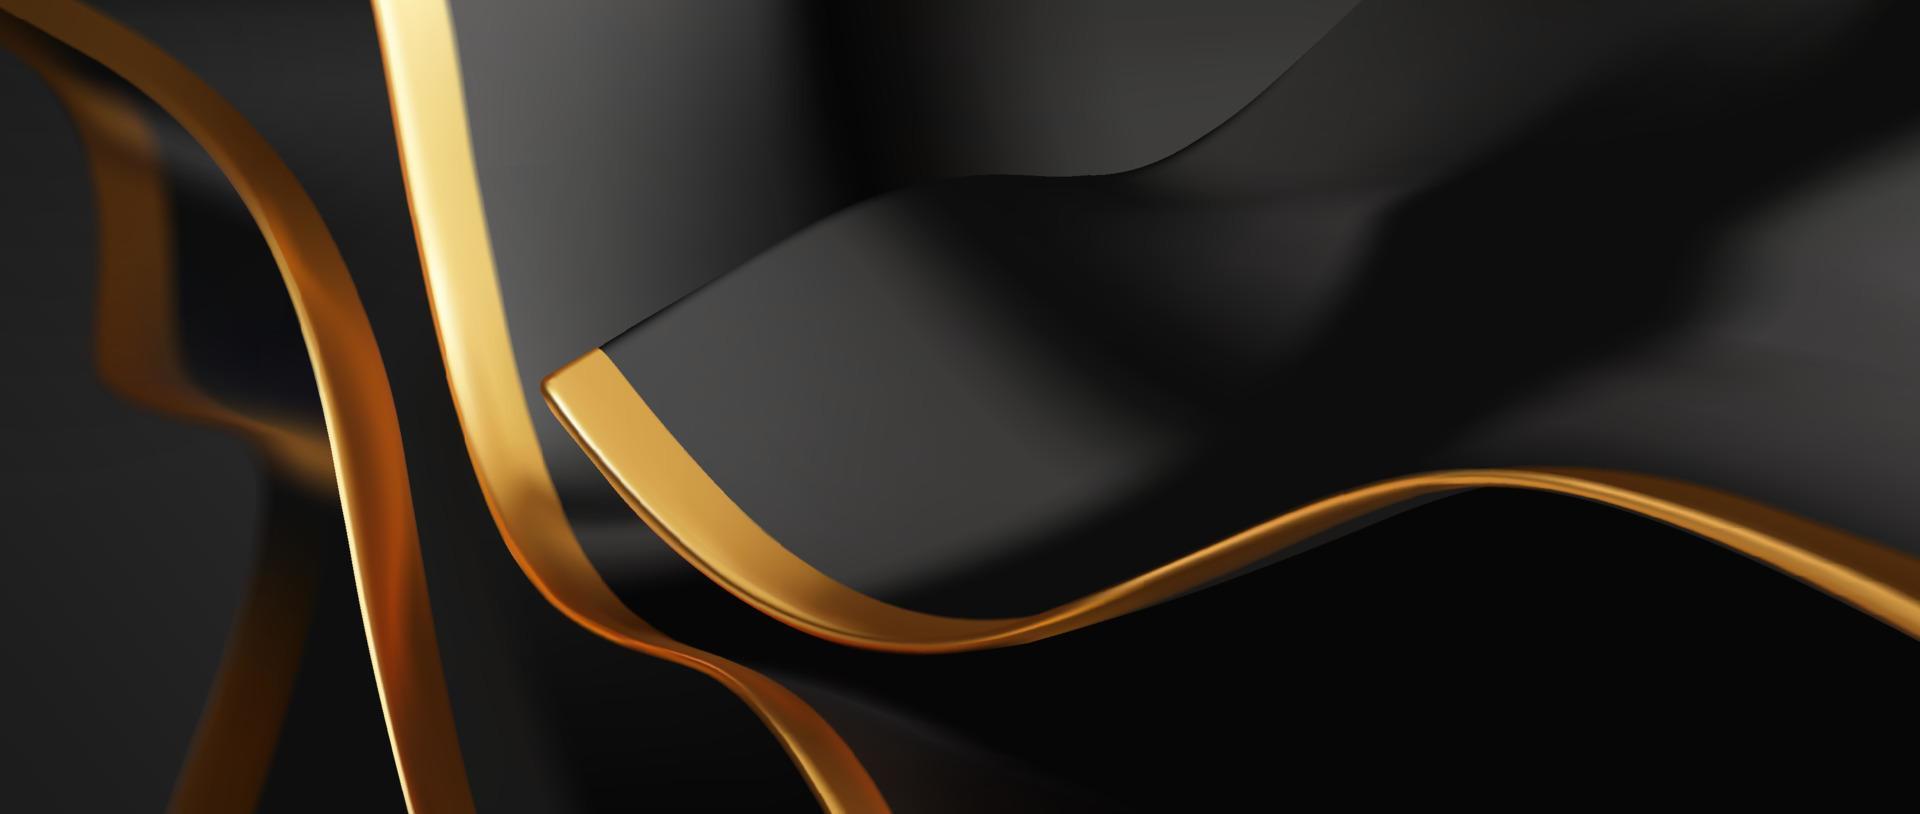 Black and gold wavy luxury background, layered wavy sheet 3d realistic wallpaper illustration vector